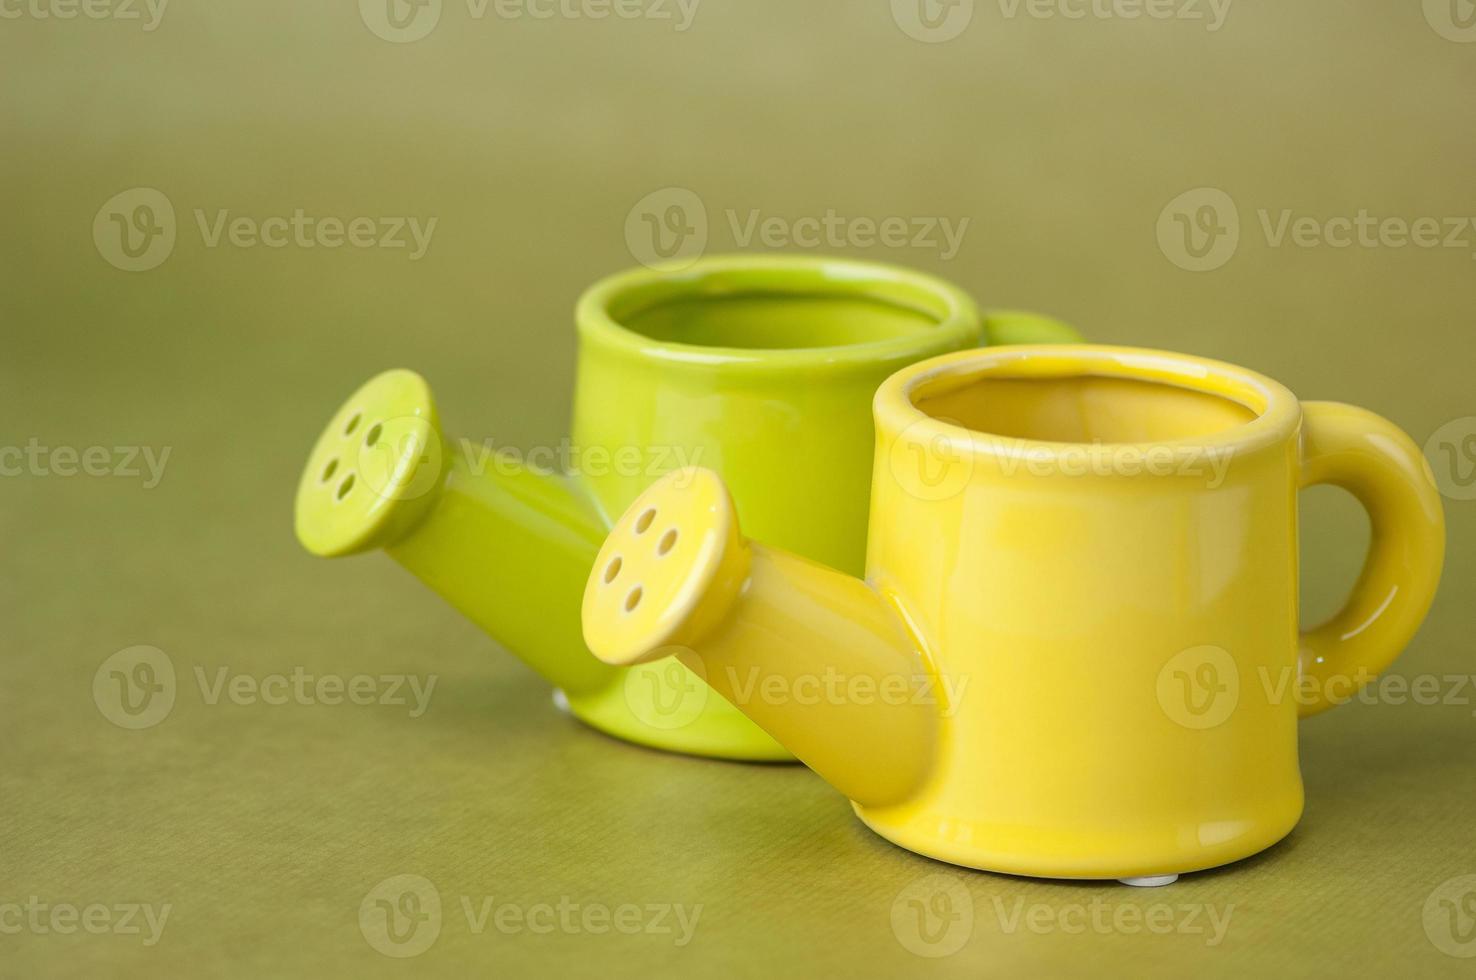 souvenir toy ceramic watering-can on a green background close up photo